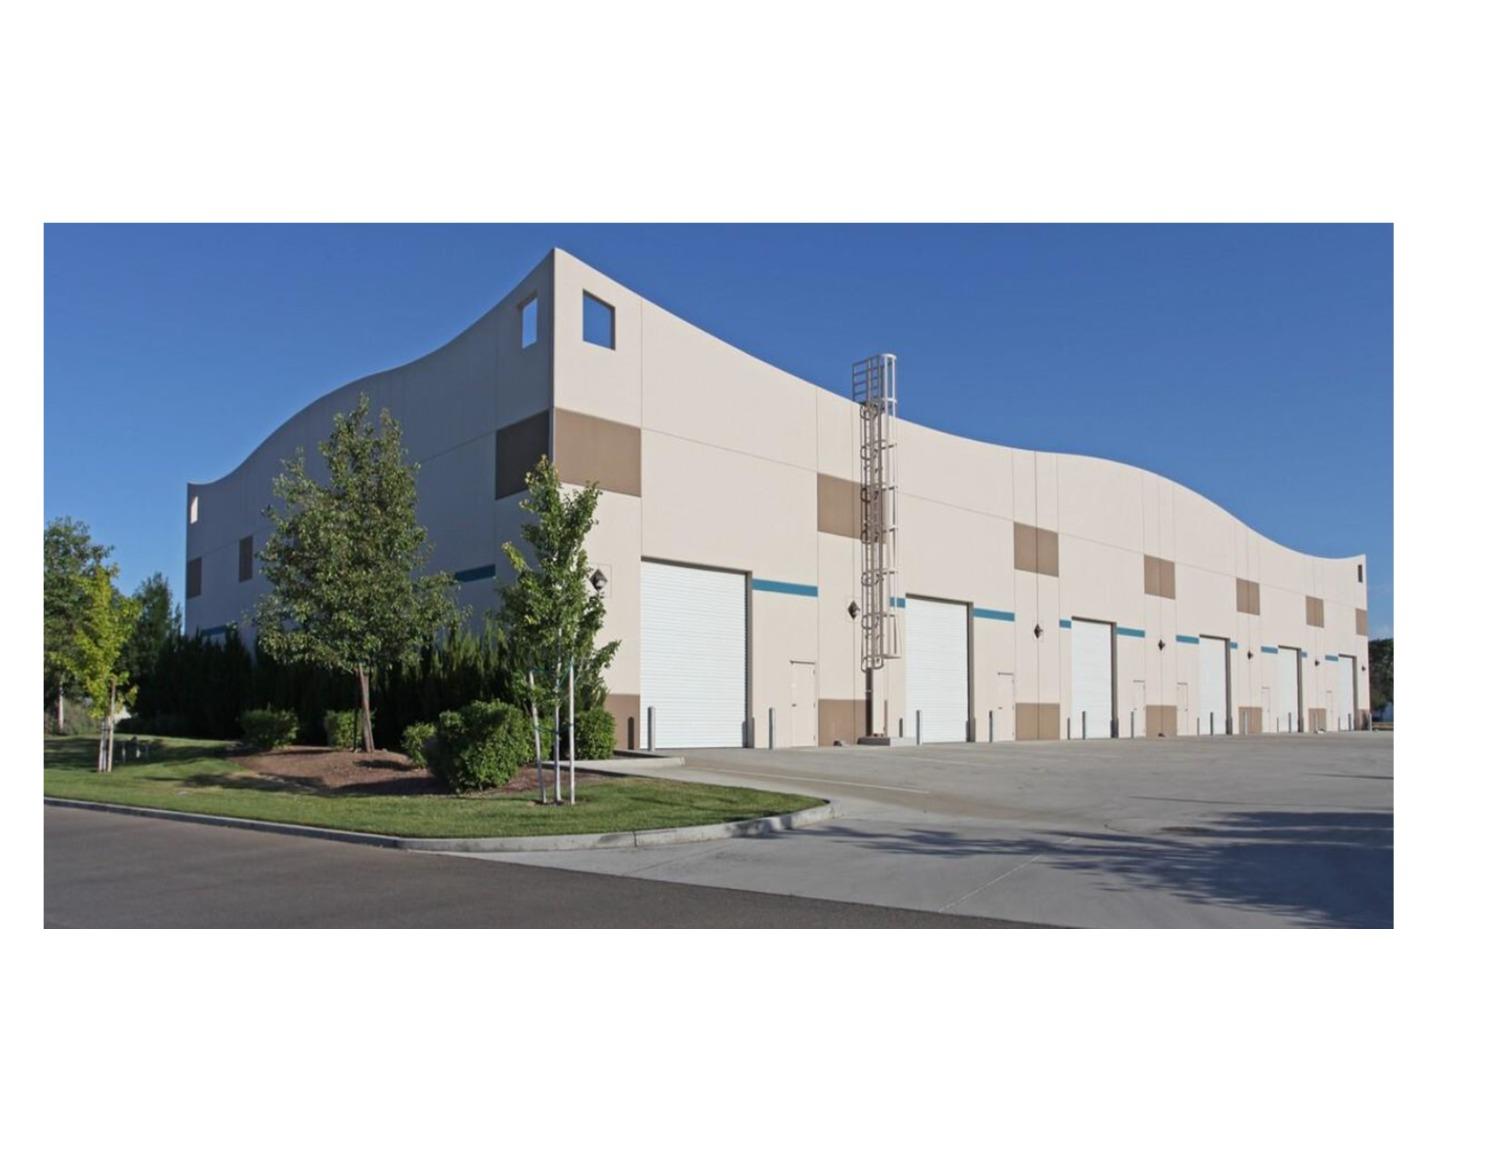 This modern (2008) 20,000 square foot concrete tilt-up building is on a 2.81 acre parcel, is attractively landscaped and has paved parking in both the front (west side) and back (east side) of the building (30 spaces). It is located in the Merced Airport Industrial Park and is adjacent to the Airport Terminal. The building has been split (framed and sheet rocked demising walls) into 3 equally sized bays (i.e., 6,667+/- per bay). The northernmost bay has men's and women's ADA compliant restrooms and a small office. The middle bay (which is currently lease thru 10-34-24) has an ADA compliant unisex restroom The building has very high (30' +/-) clear height, is fully sprinklered and has 2 (12' wide x 14' high) roll-up doors on the east side of each bay for vehicle and equipment access and man-doors to each bay on both the east and west sides of the building. Also available are the 3 parcels to the north 160 Macready, which abuts to the subject property), aka 059-300-068 is 1.67 acres and listed at $581,691; 170 Macready, to the north of 160, aka 059-00-067 is 1.90 acres and listed for $662,112 and 180 Macready, to the north of 170, aka 059-300-066 is 1.76 acres and listed at $613,625. Owner may consider a lease at $0.80 per square foot.